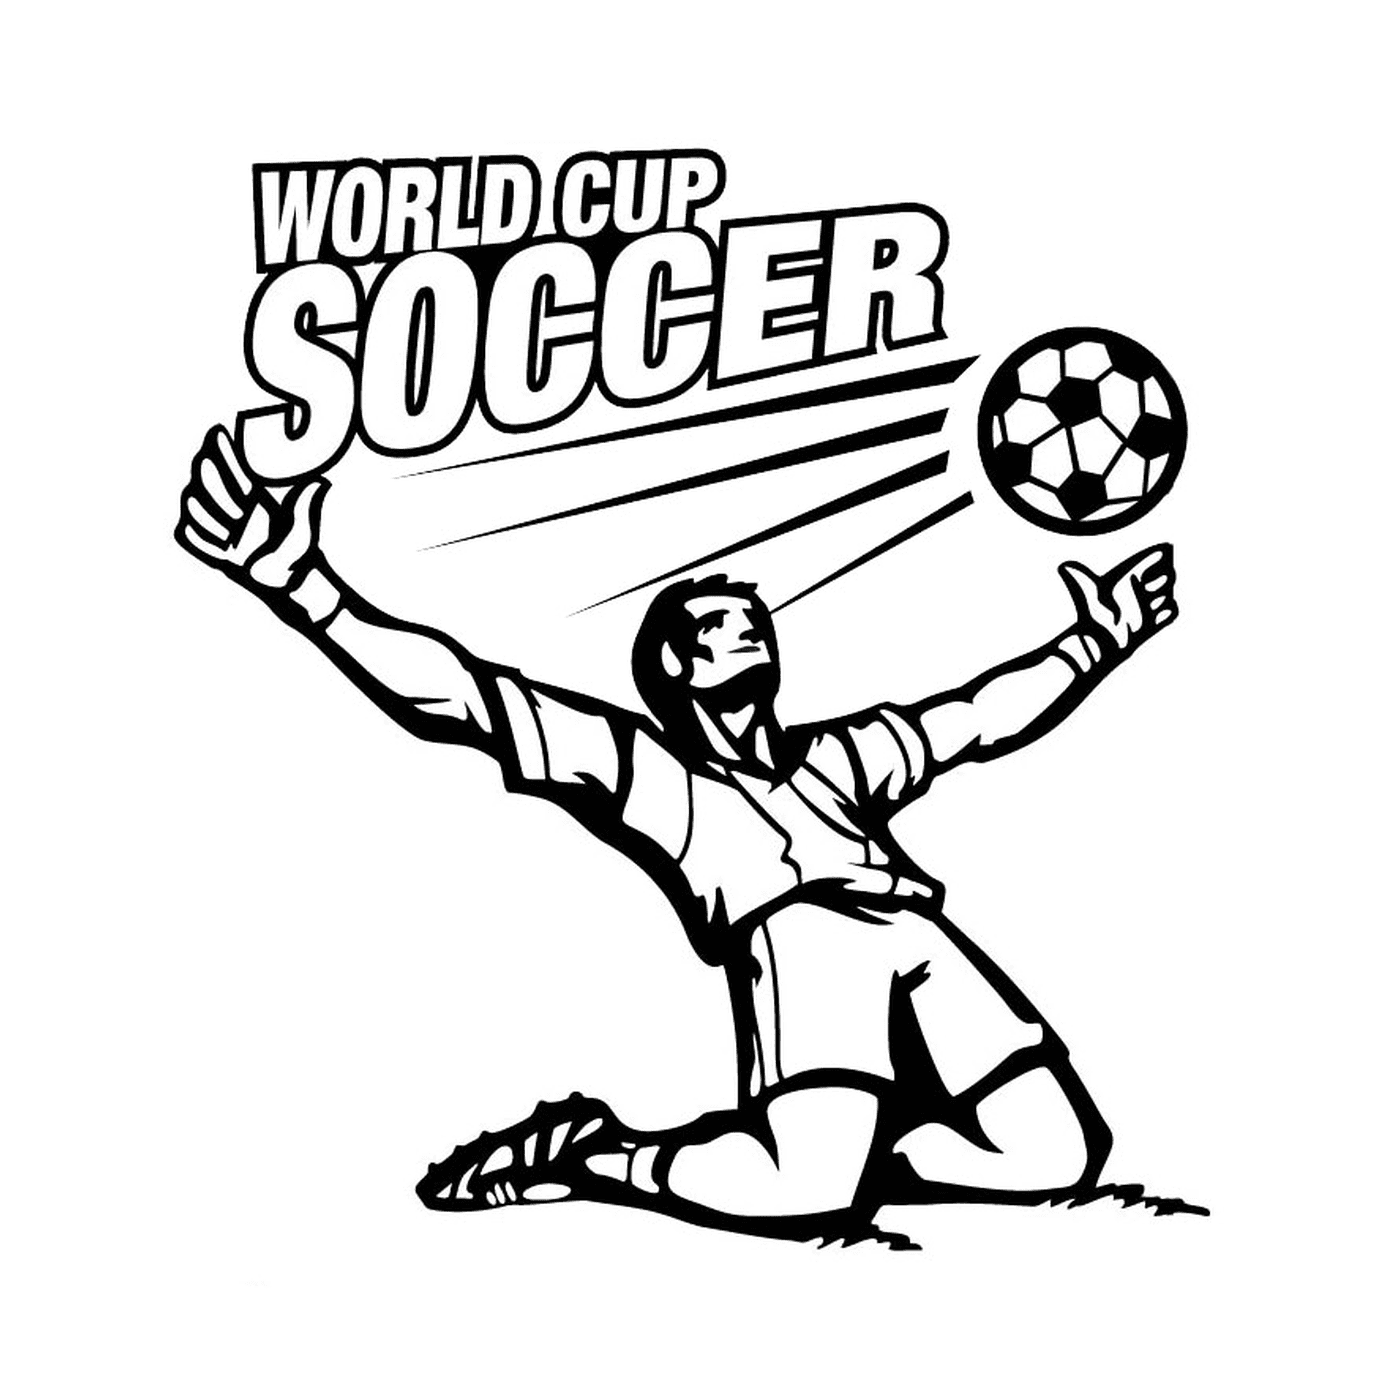  Soccer World Cup 